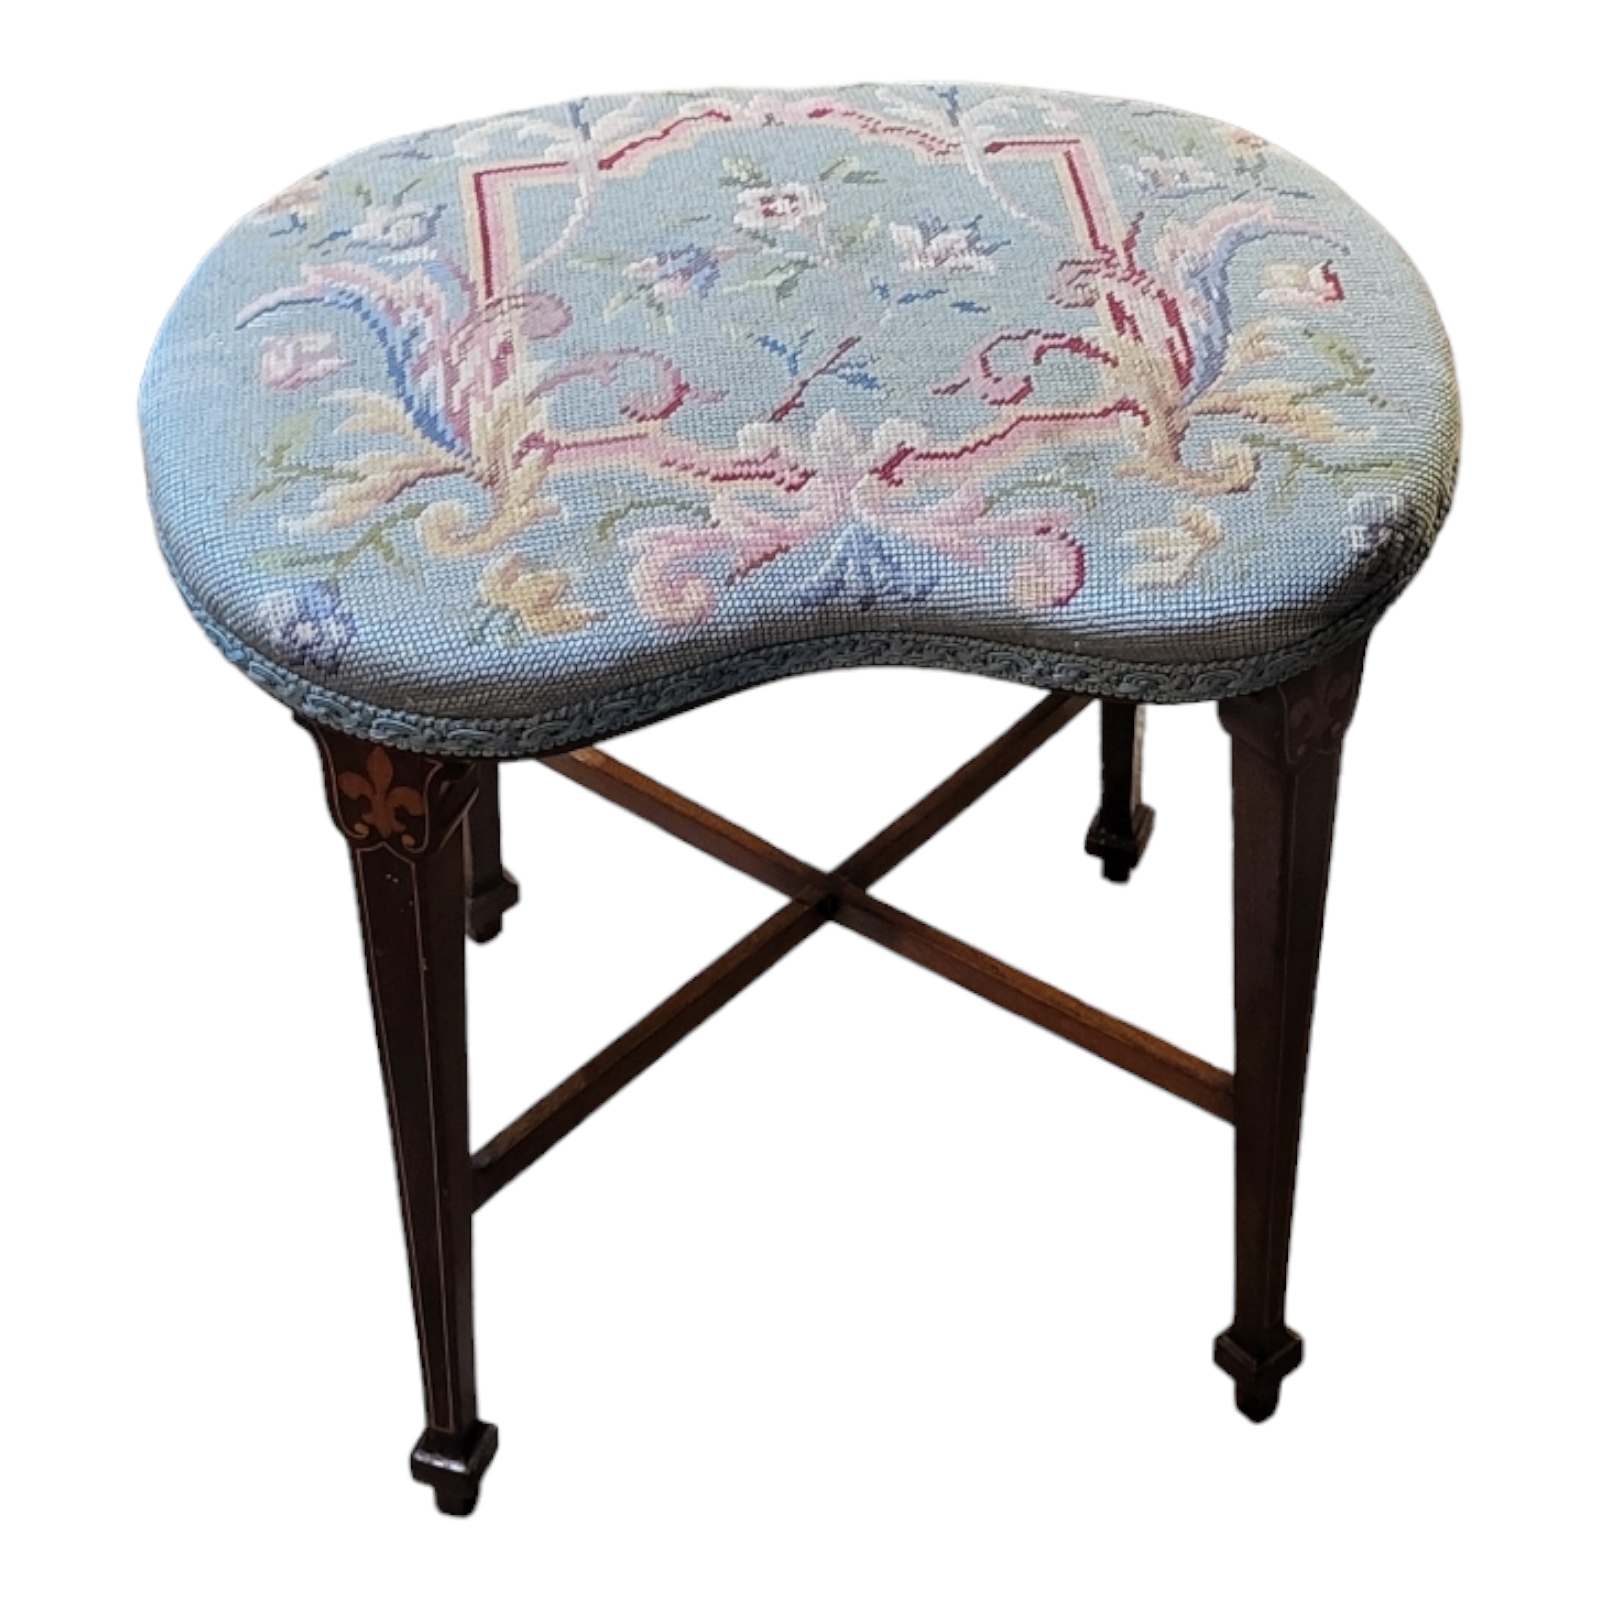 AN EDWARDIAN SHERATON REVIVAL INLAID MAHOGANY STOOL Raised on tapering legs and x shaped supports, - Image 2 of 5